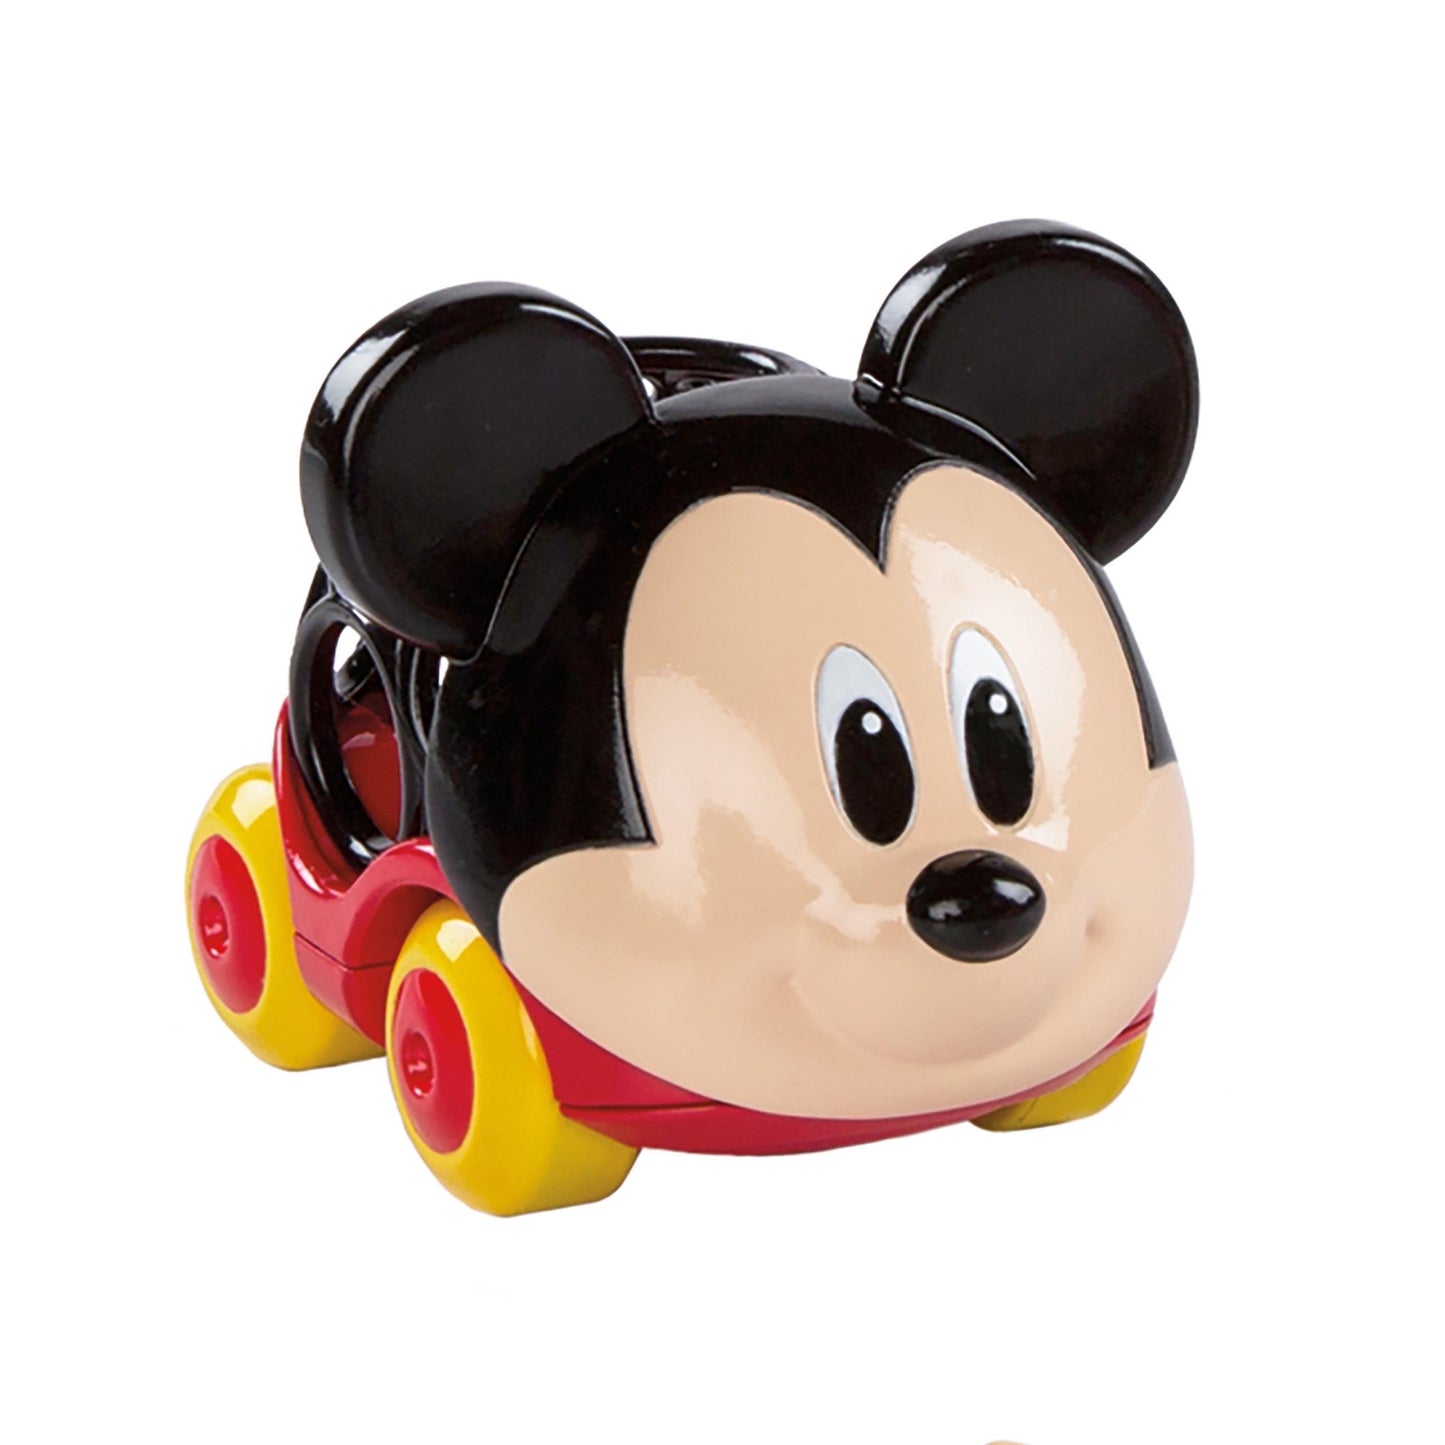 Bright Starts Disney Baby Go Grippers Collection Push Cars - Mickey Mouse & Friends, Ages 12 months +